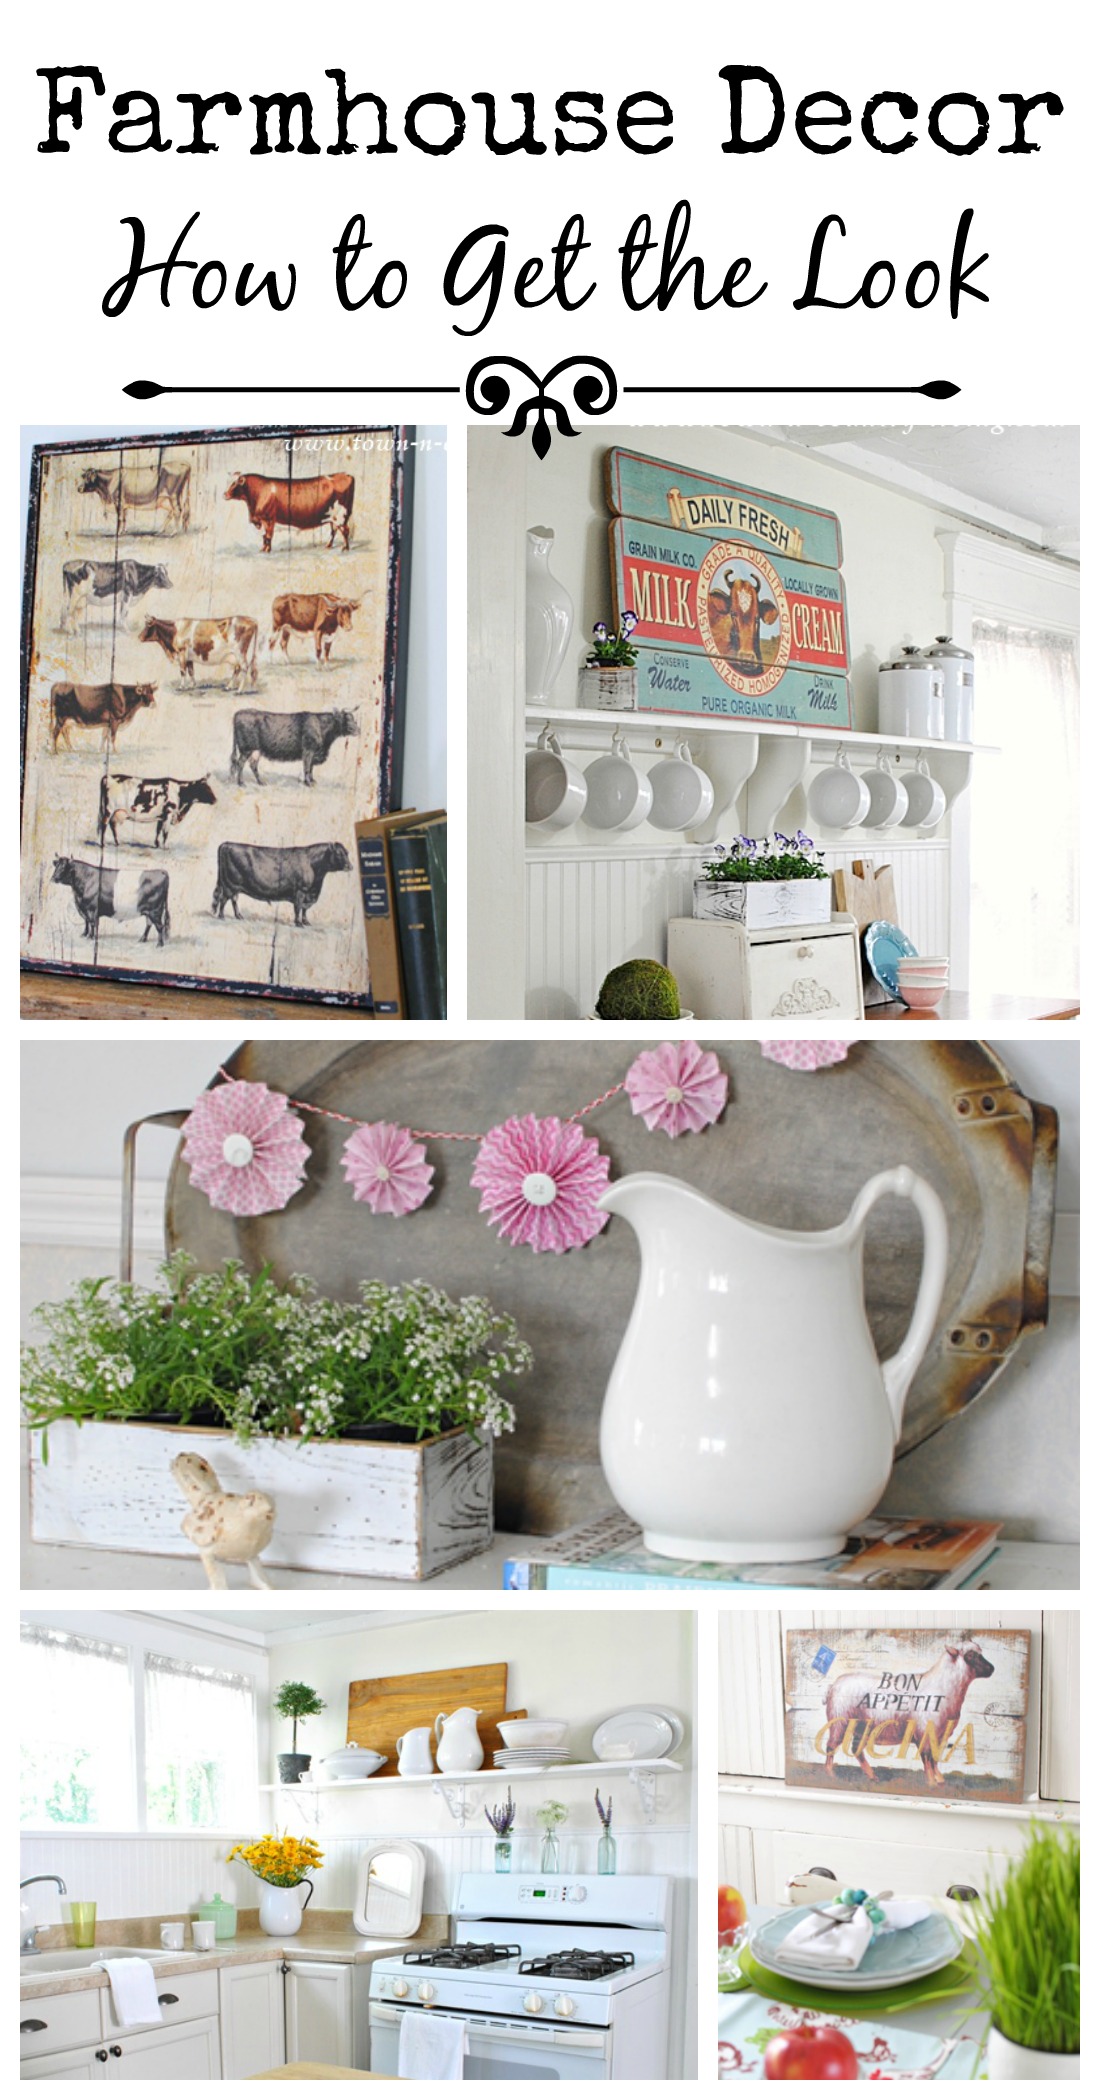 Farmhouse Decor and a $50 Giveaway - Town & Country Living